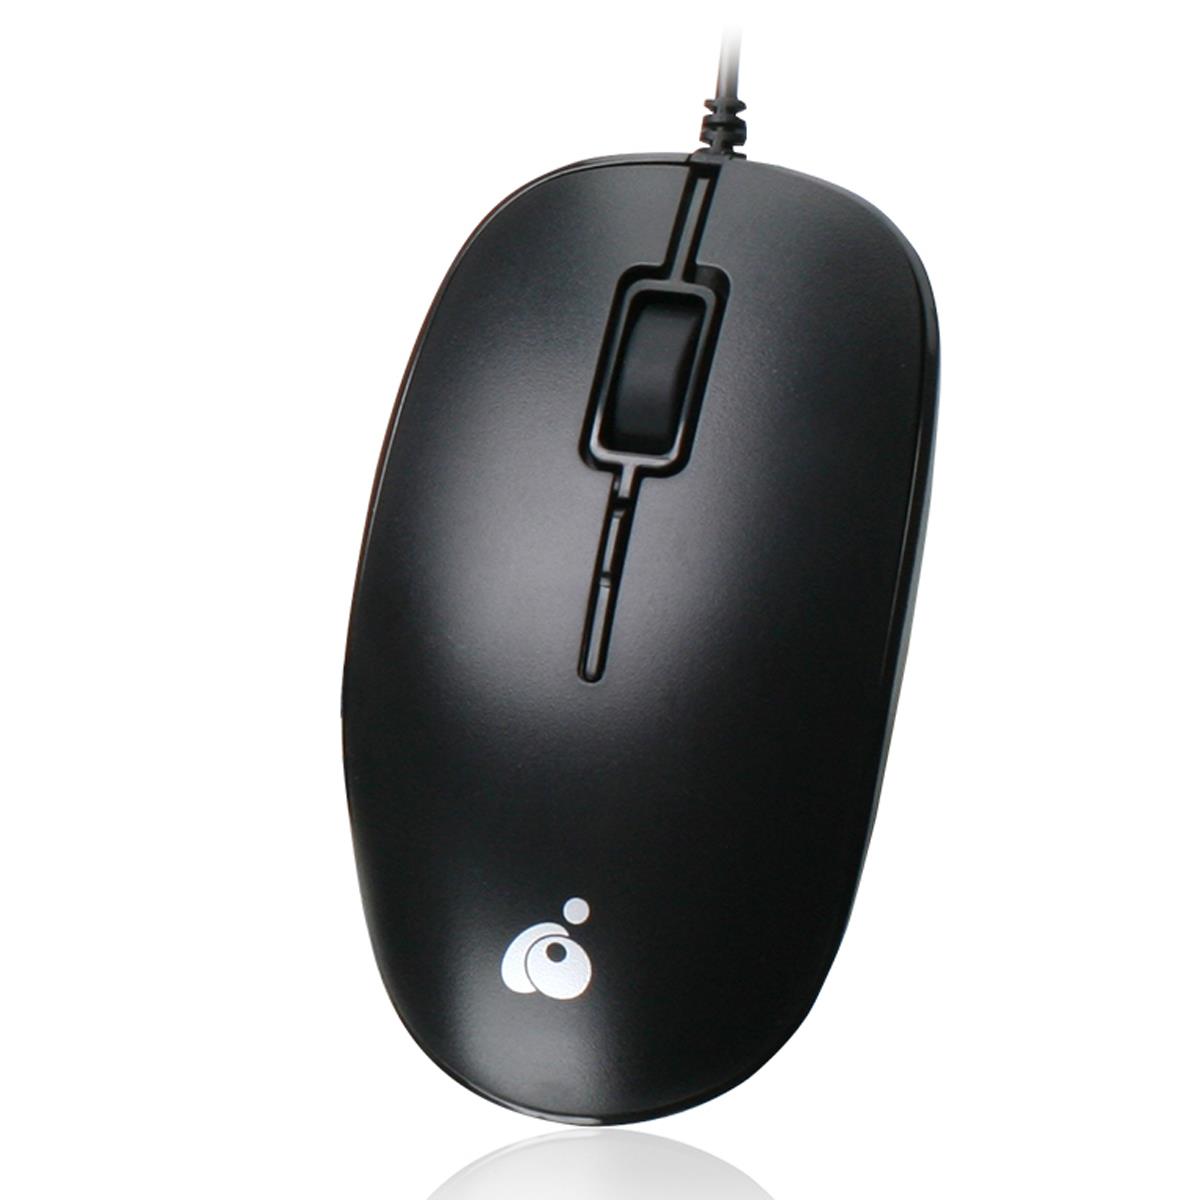 

IOGEAR 3-Button Optical USB Wired Mouse, TAA Compliant